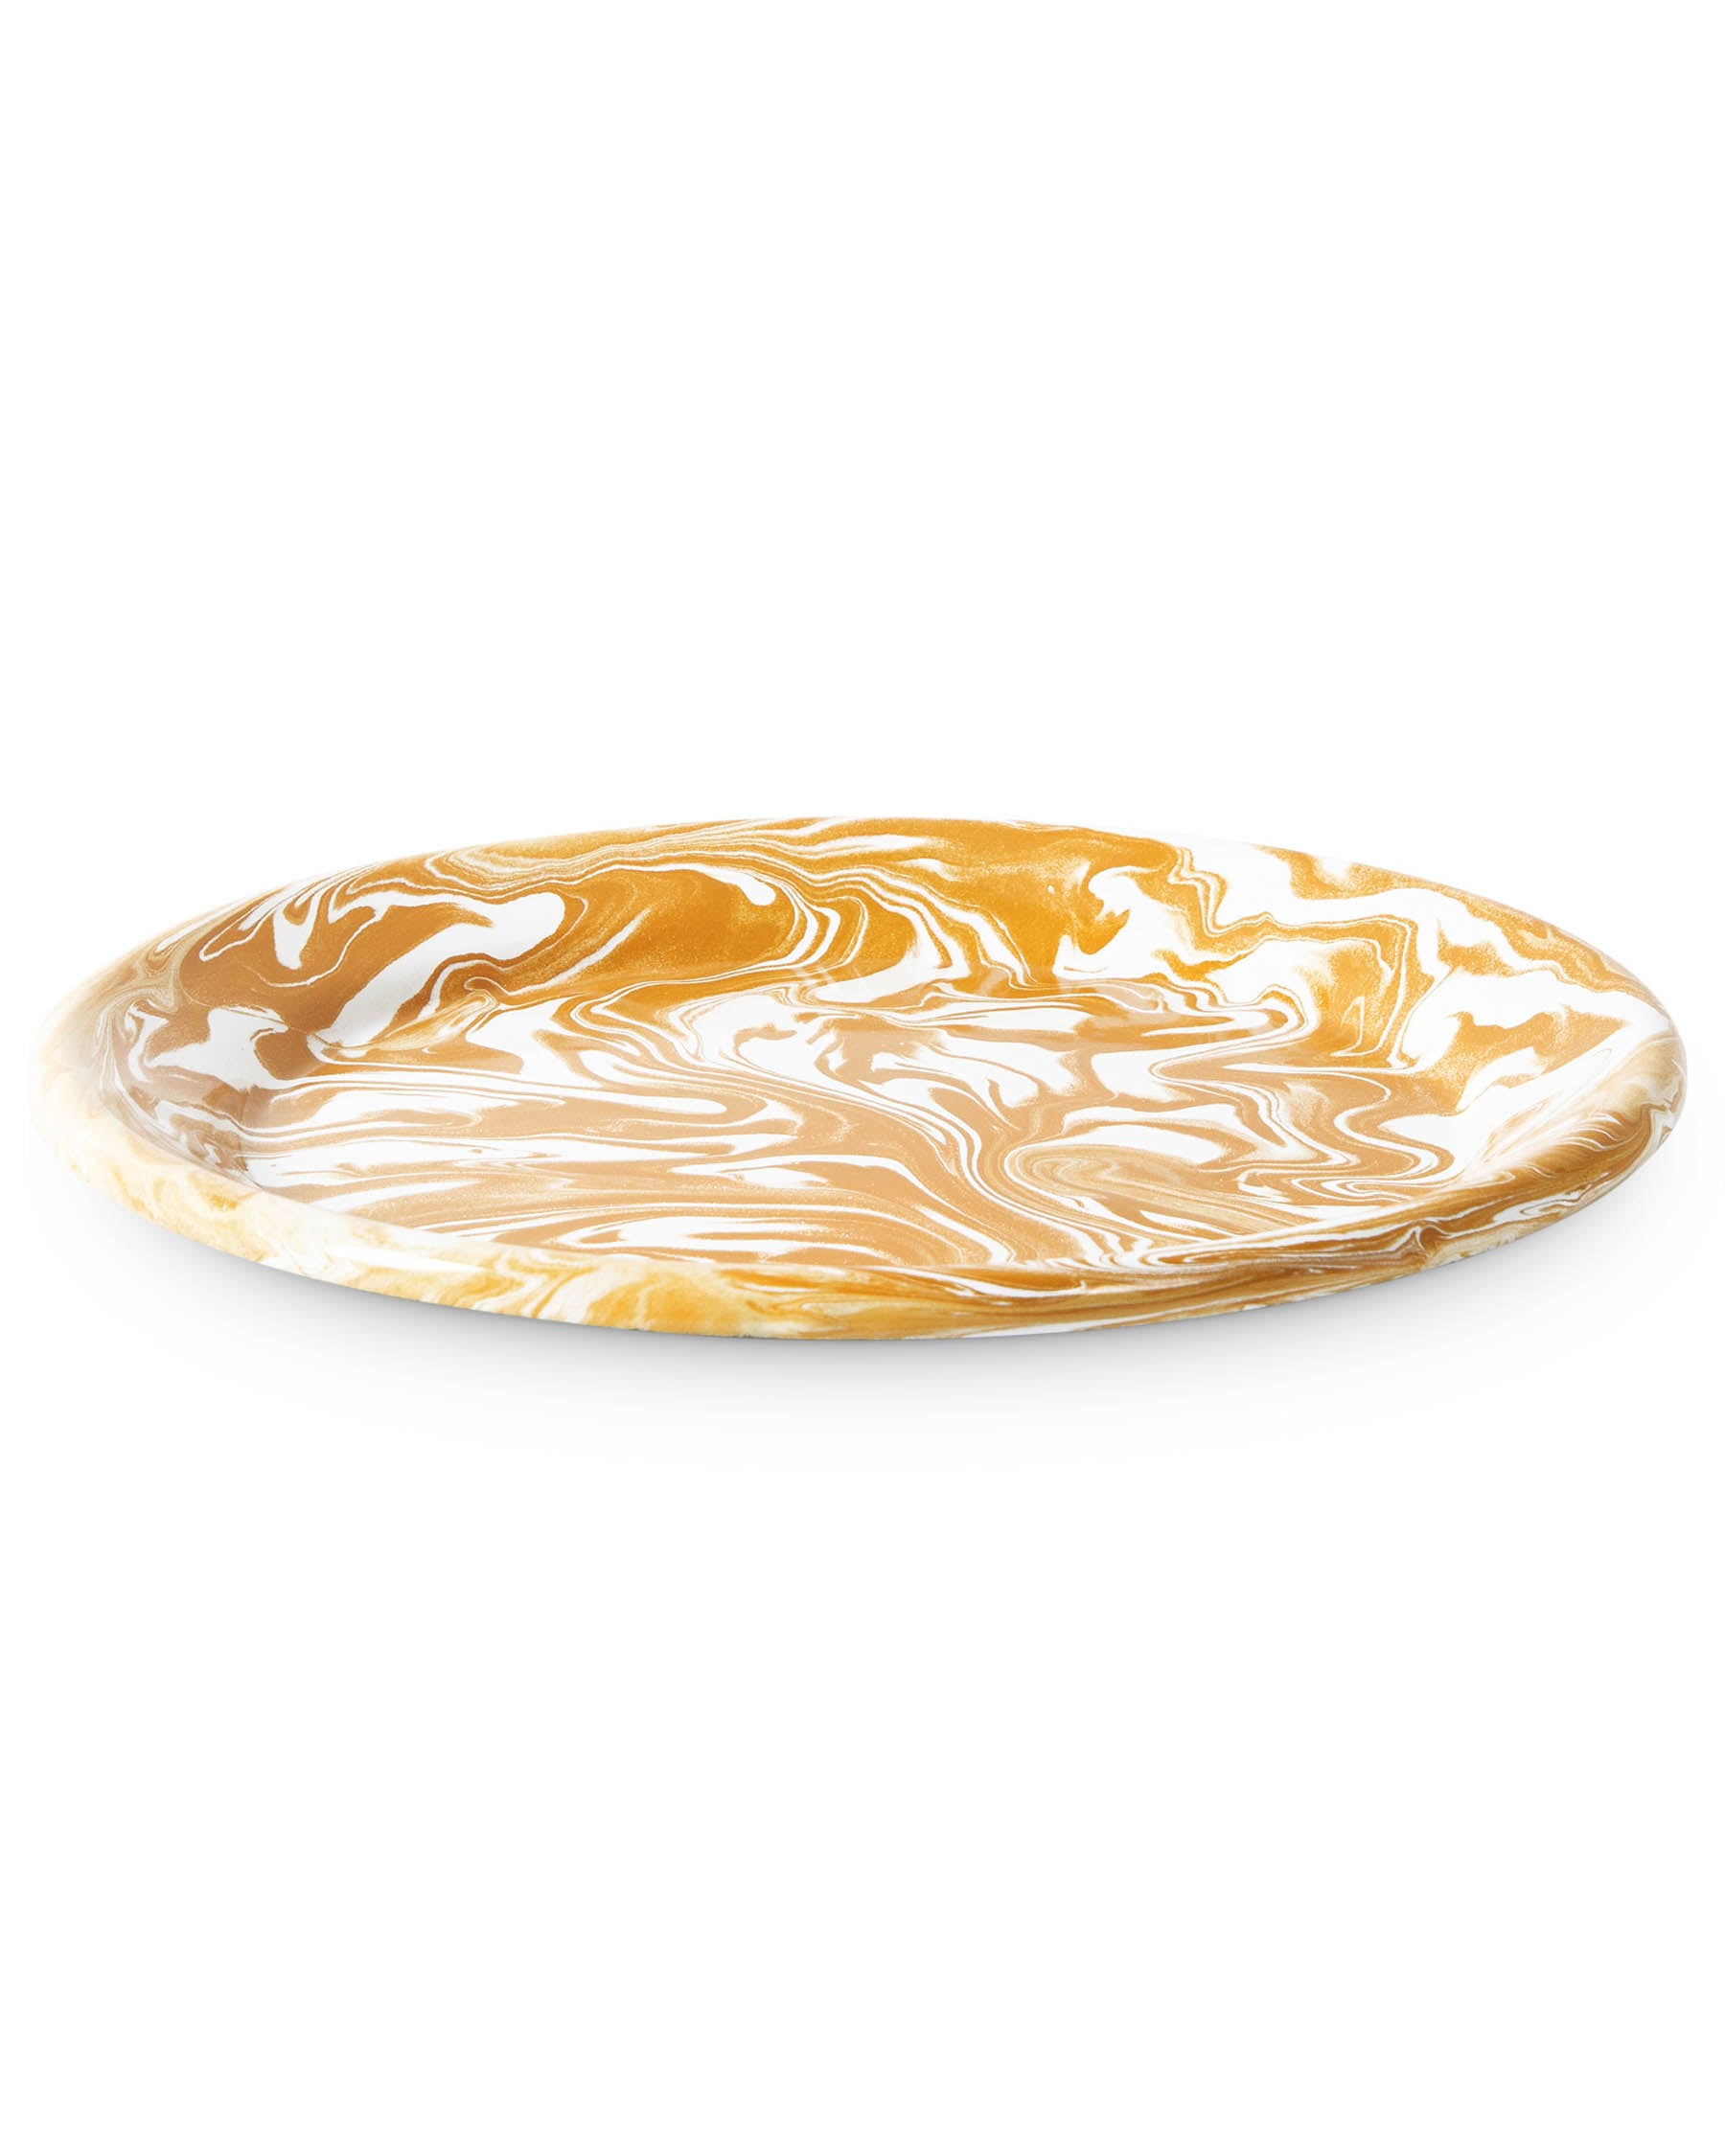 https://cdn.shopify.com/s/files/1/0231/5727/6752/products/Kip-and-Co-Enamel-AW23-Golden-Marble-Plate.jpg?v=1675741350